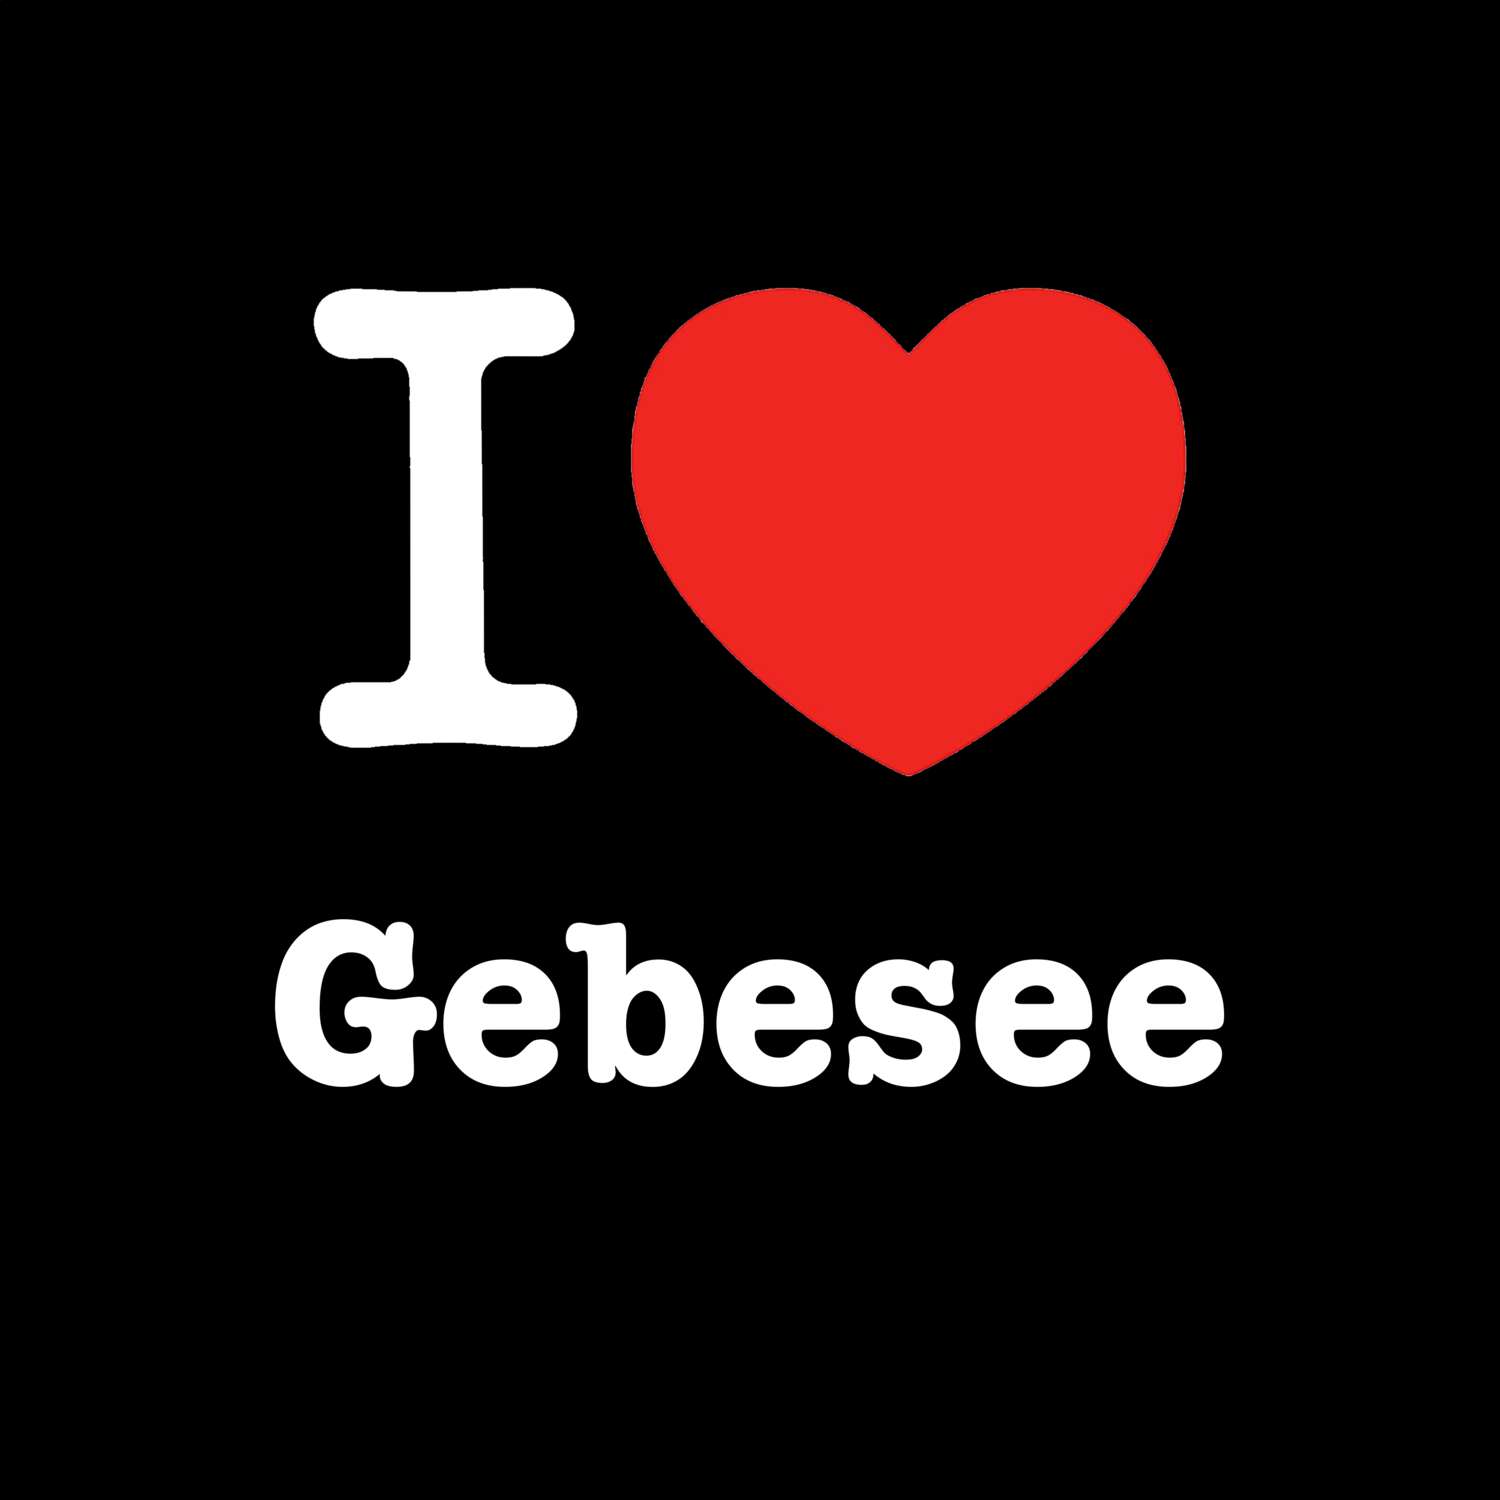 Gebesee T-Shirt »I love«